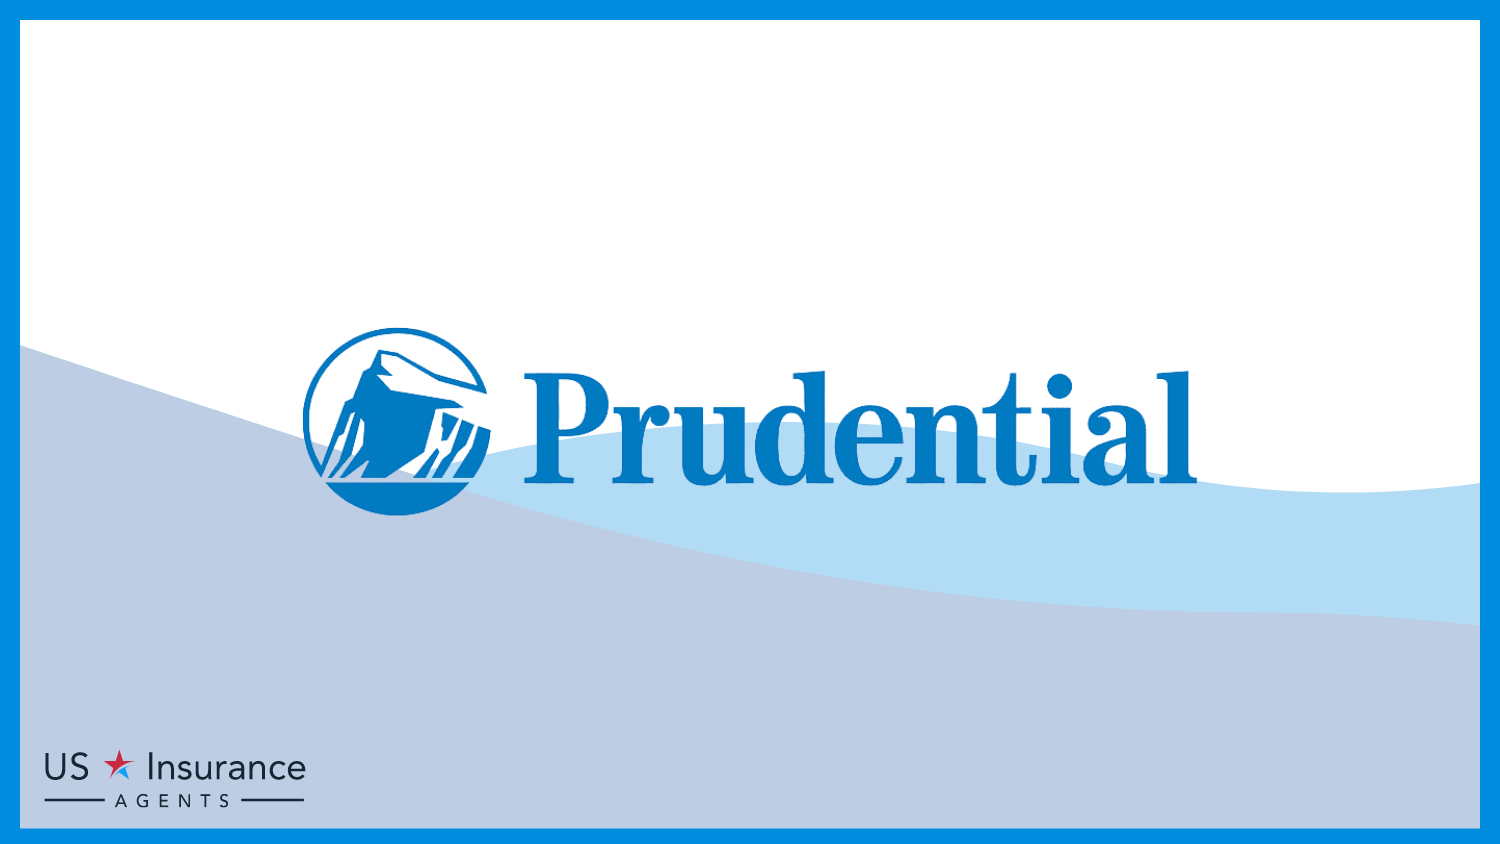 Prudential: Best Life Insurance for High-Net-Worth